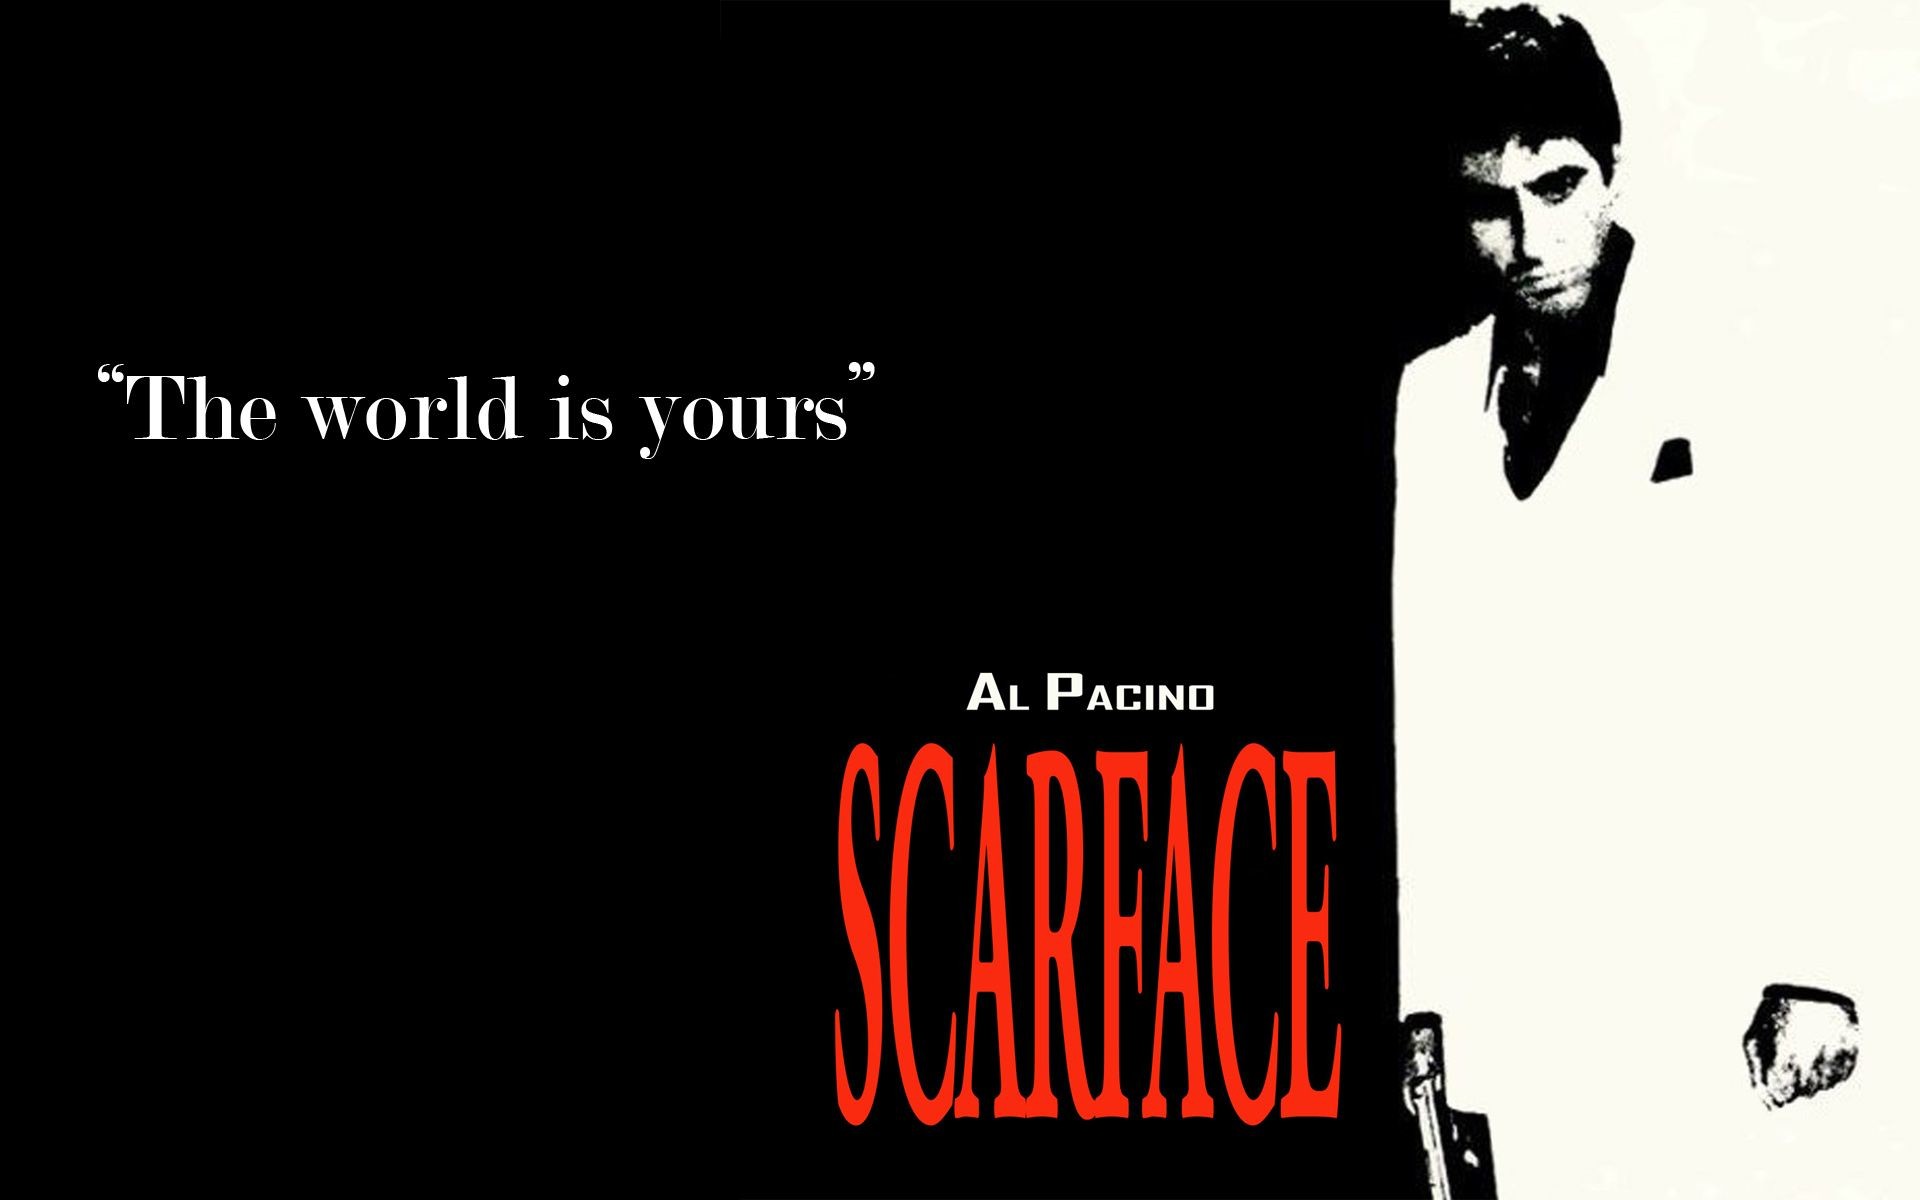 1920x1200 DA58: Scarface The World Is Yours Wallpapers, Scarface The World Is ..